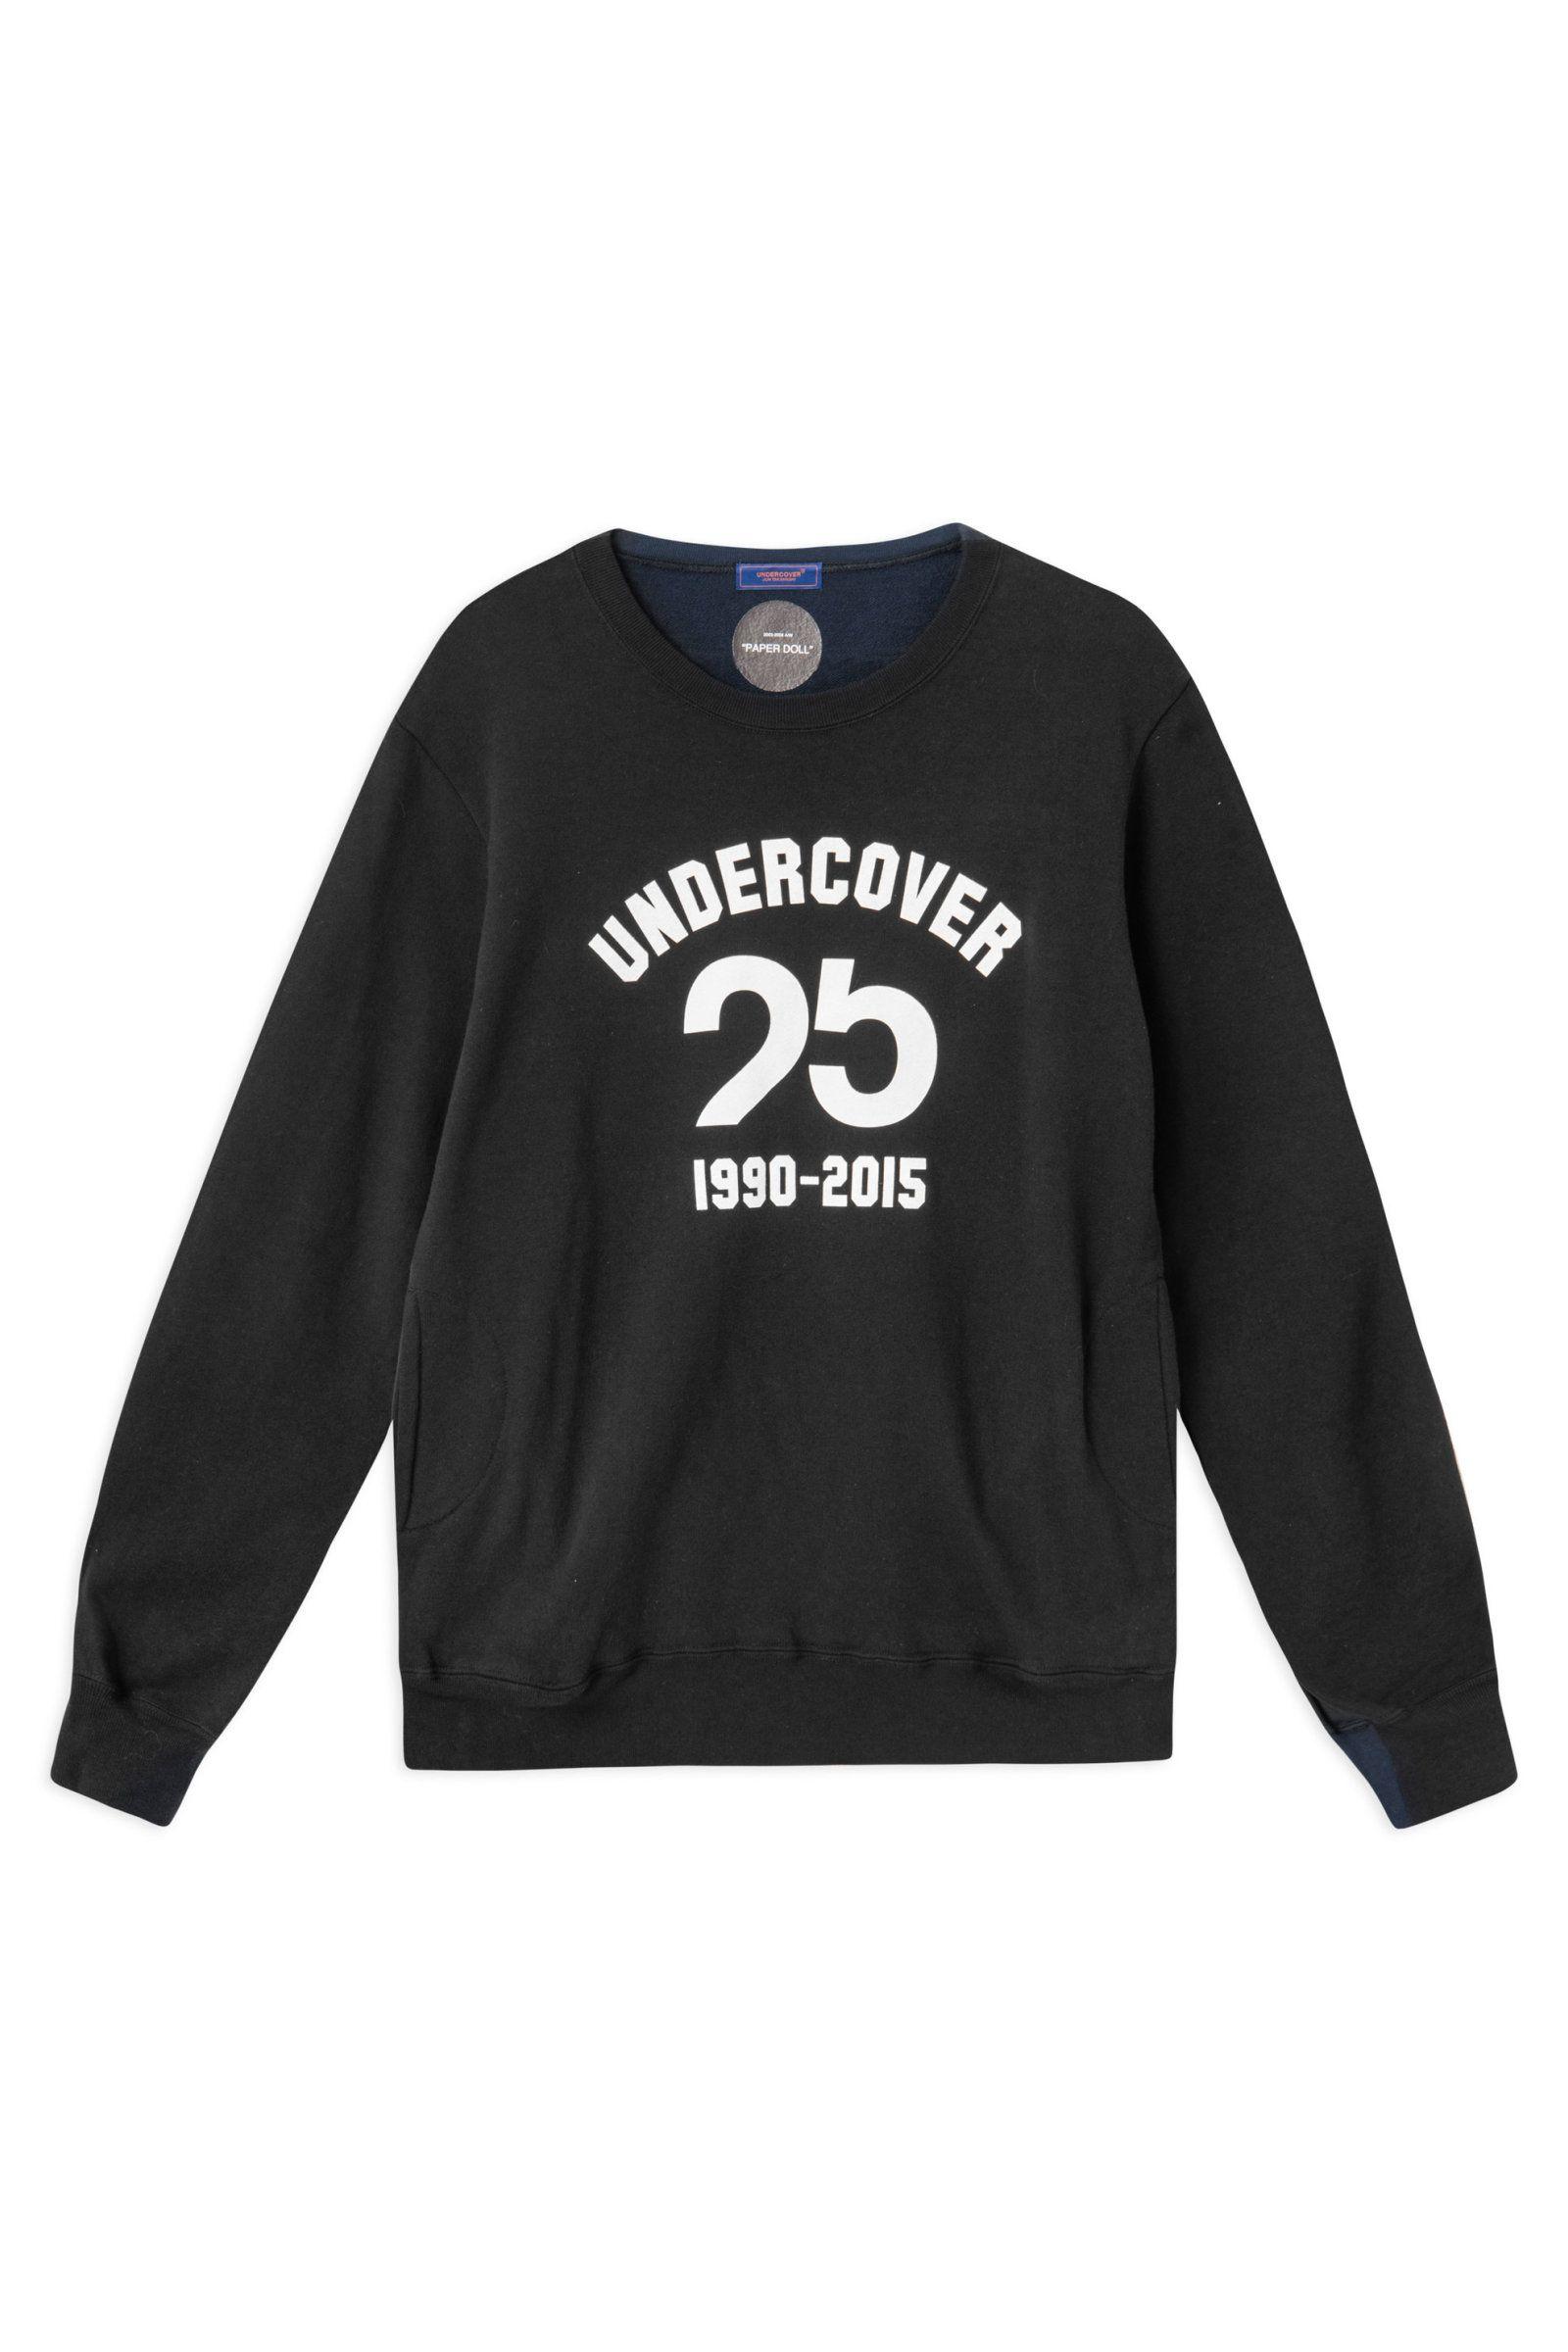 Undercover Clothing Logo - Undercover - Women's sweatshirt in black // Available at Wood Wood